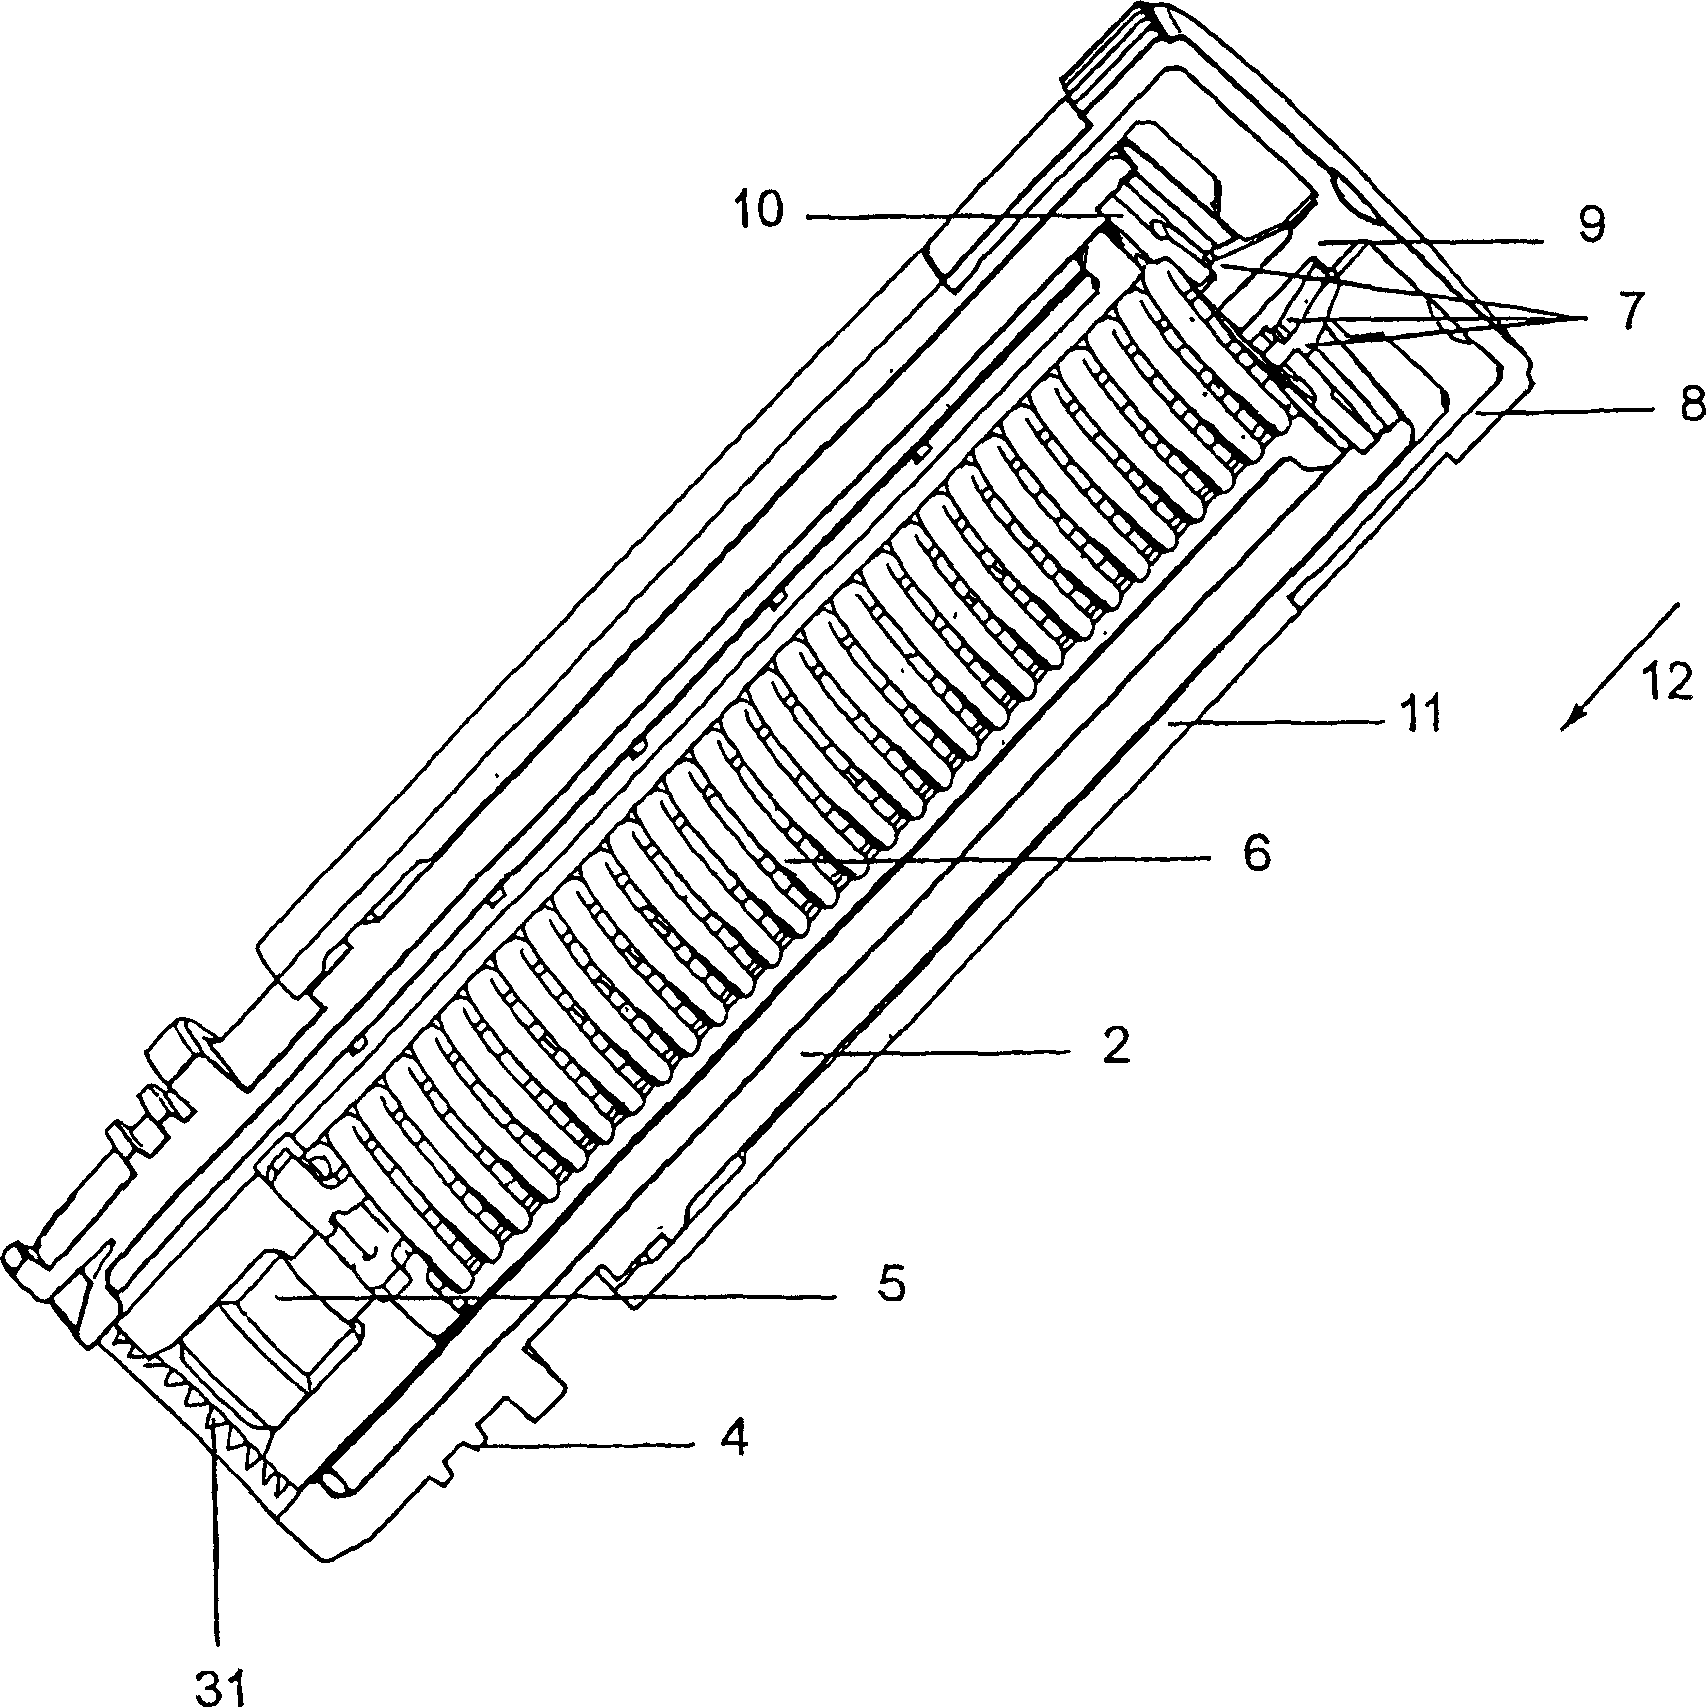 Device for automatically injecting liquids to be injected